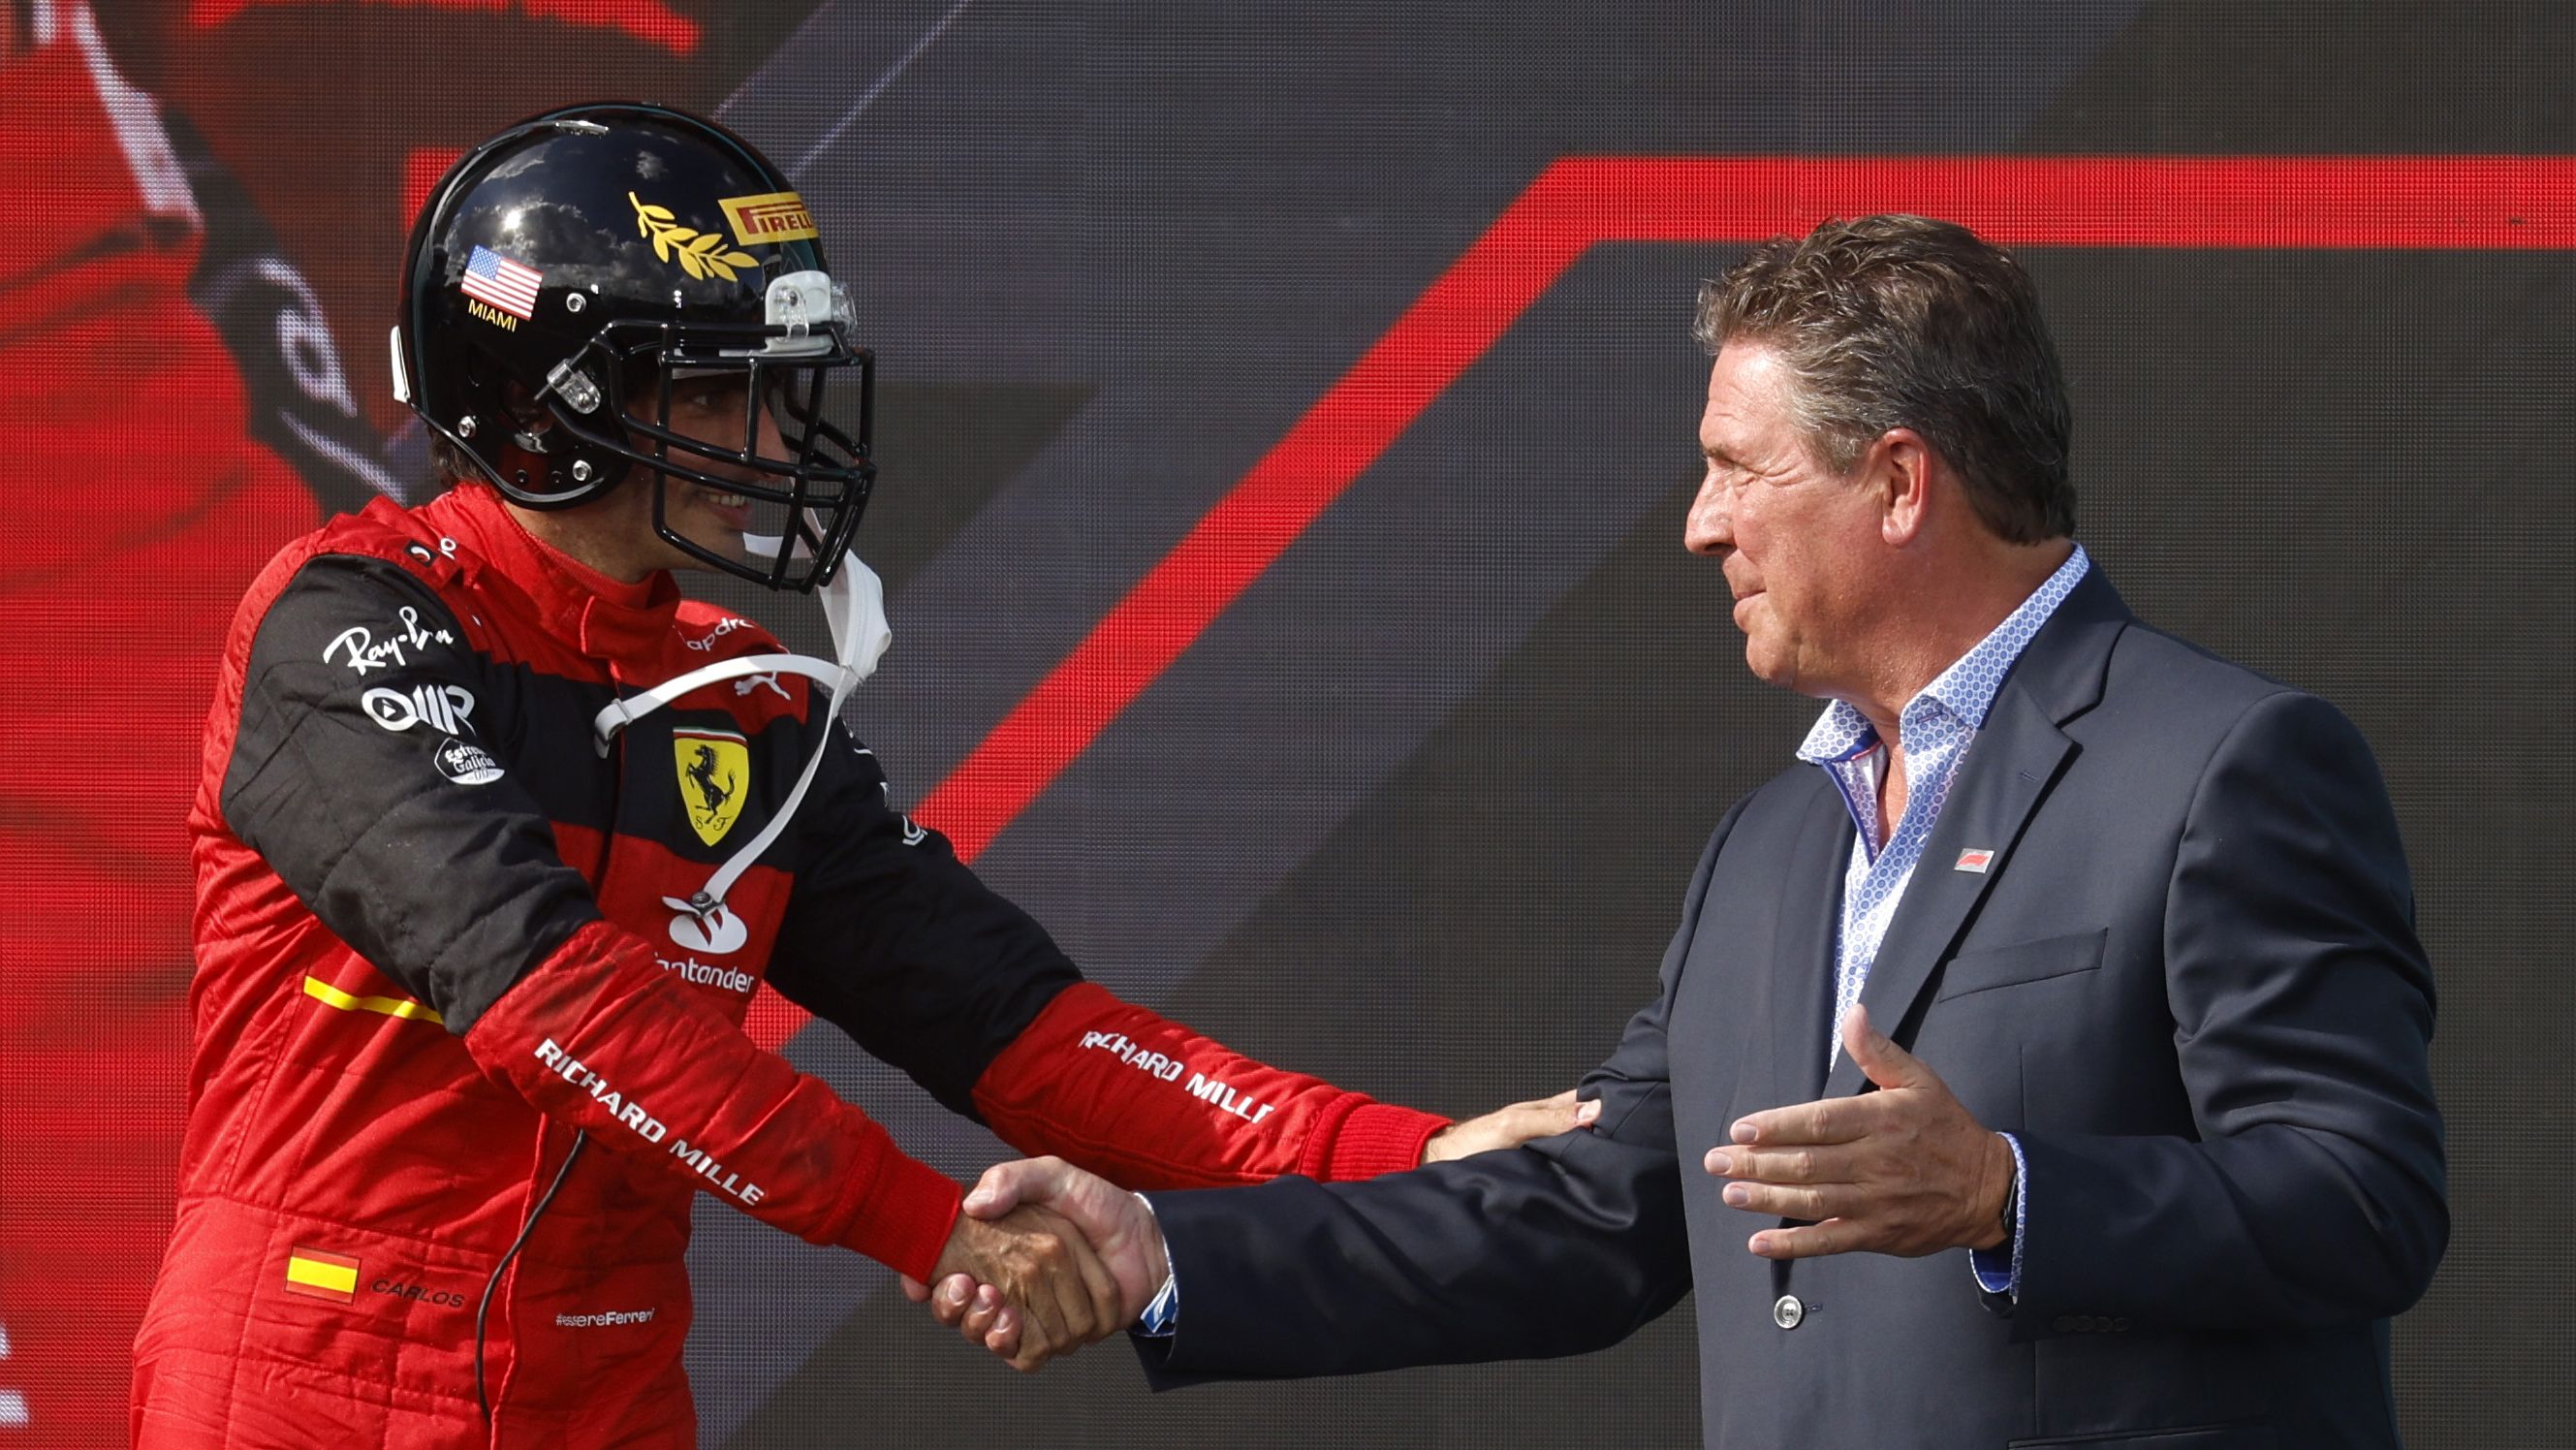 They made the top-three finishers at last year's Miami GP wear football helmets on the podium. Here, Ferrari's Carlos Sainz shakes hands with Dolphins legend Dan Marino after coming in third. Photo: Chris Graythen/Getty Images